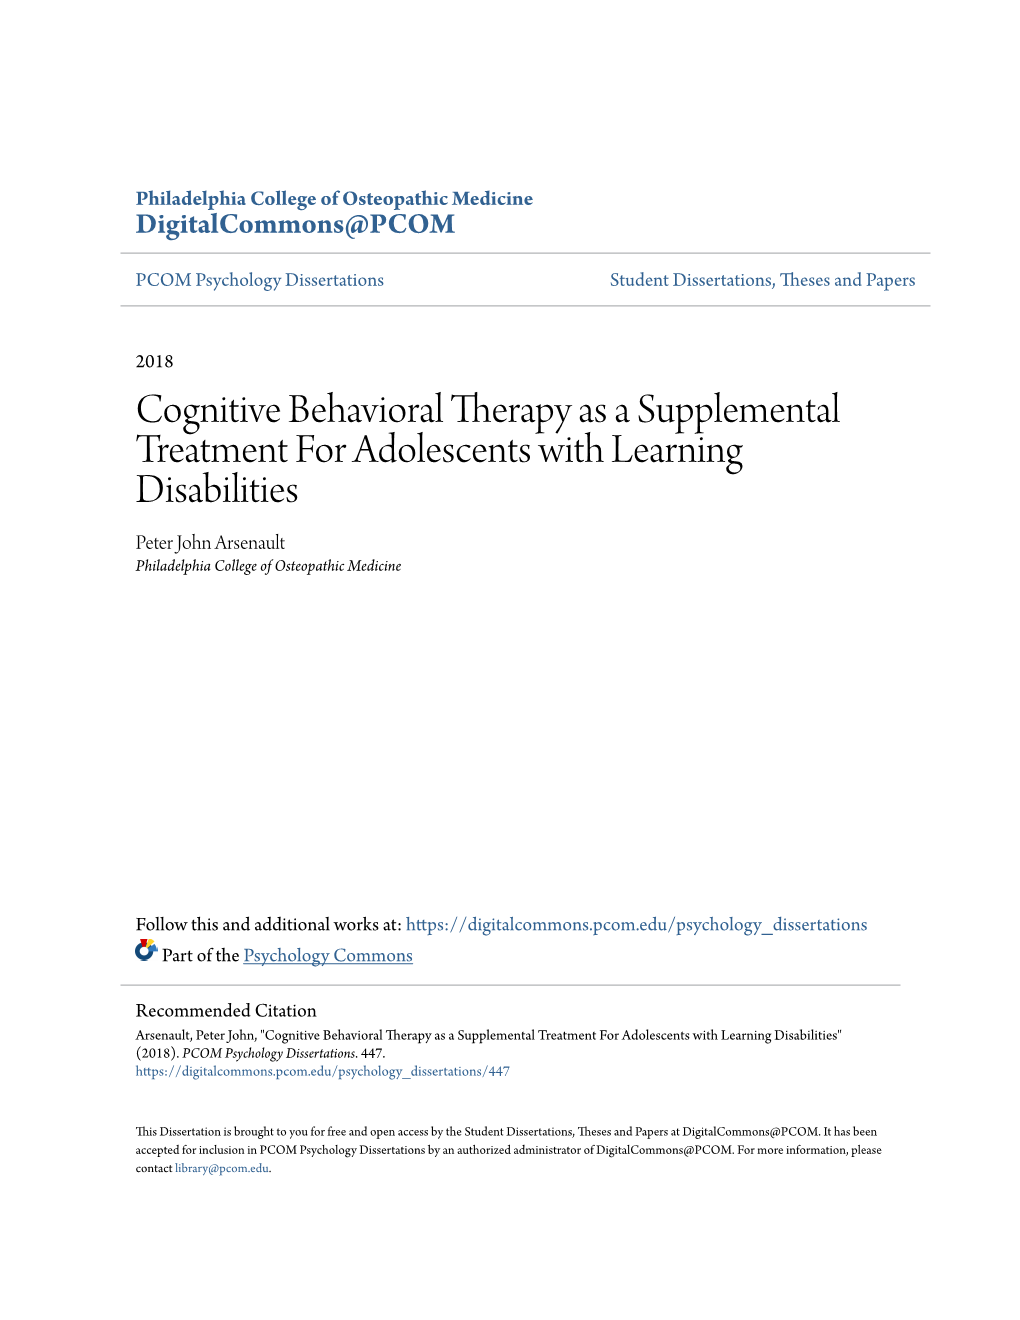 Cognitive Behavioral Therapy As a Supplemental Treatment for Adolescents with Learning Disabilities Peter John Arsenault Philadelphia College of Osteopathic Medicine